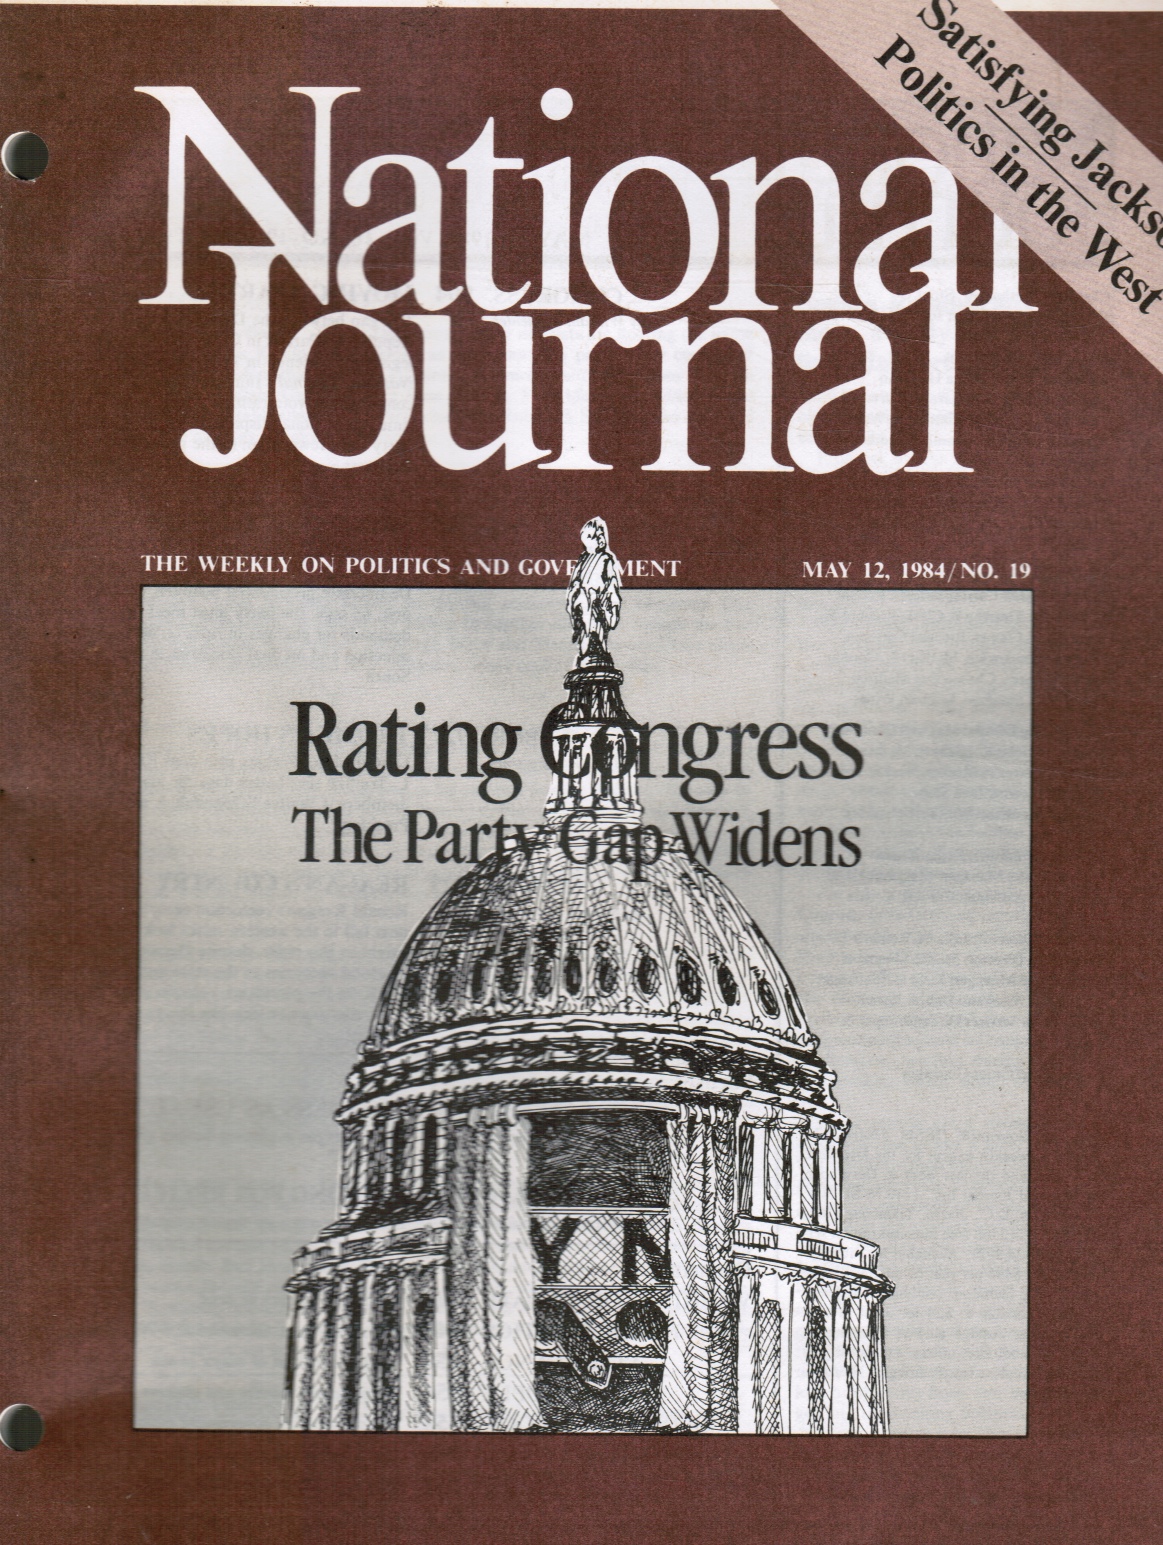 EDITORS - National Journal: May 12, 1984 Rating Congress: The Party Gap Widens